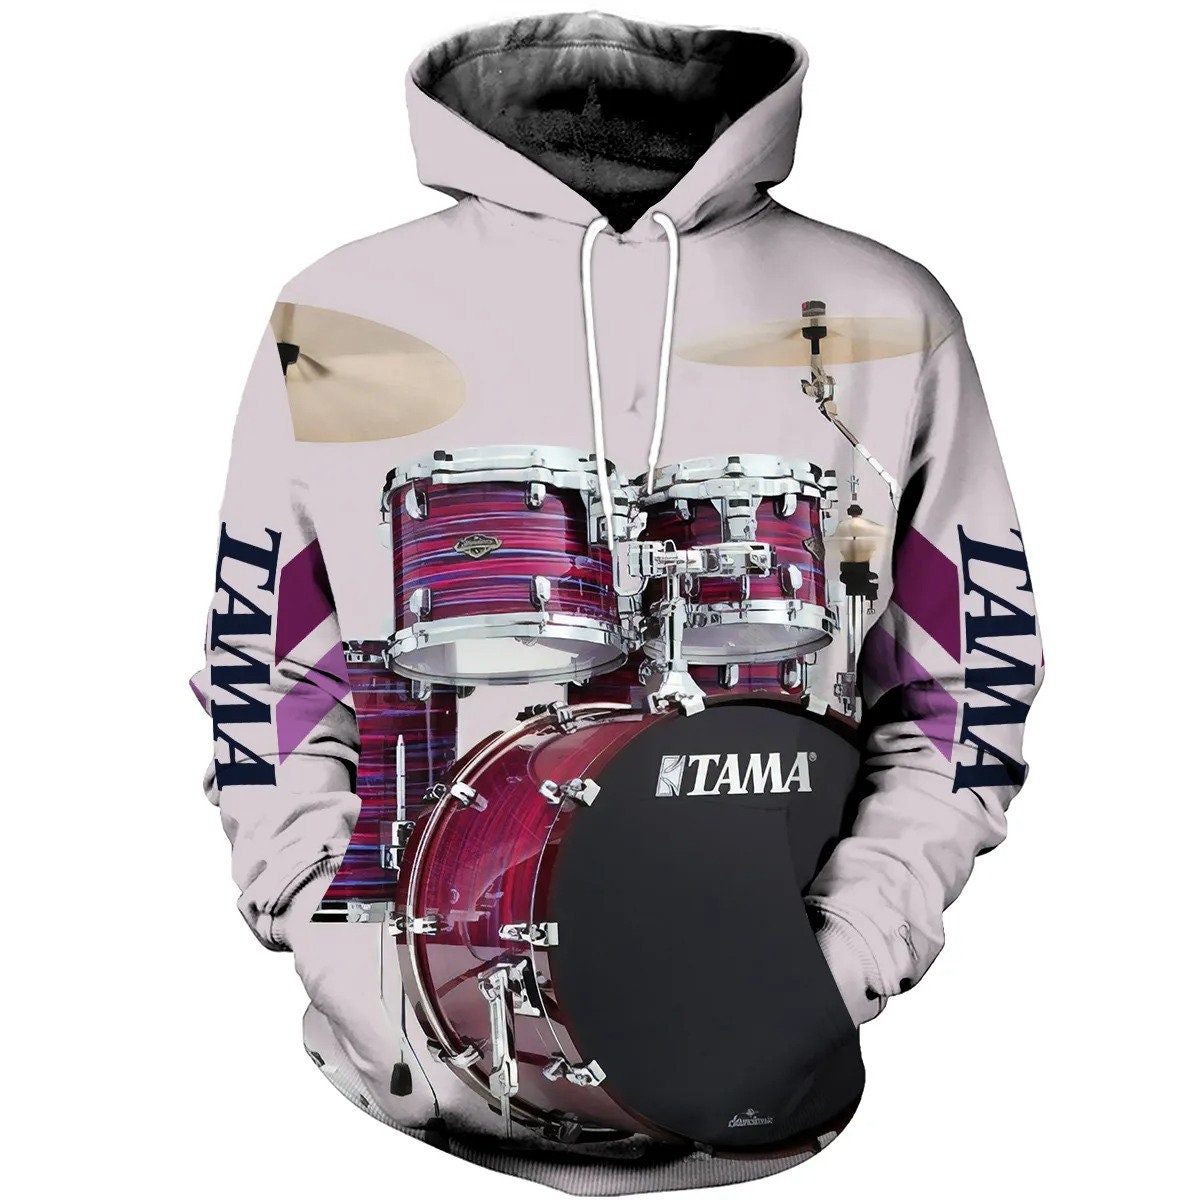 3Ds Alls Overs Printeds Beautifuls Drumss AOPs Unisexs Hoodies